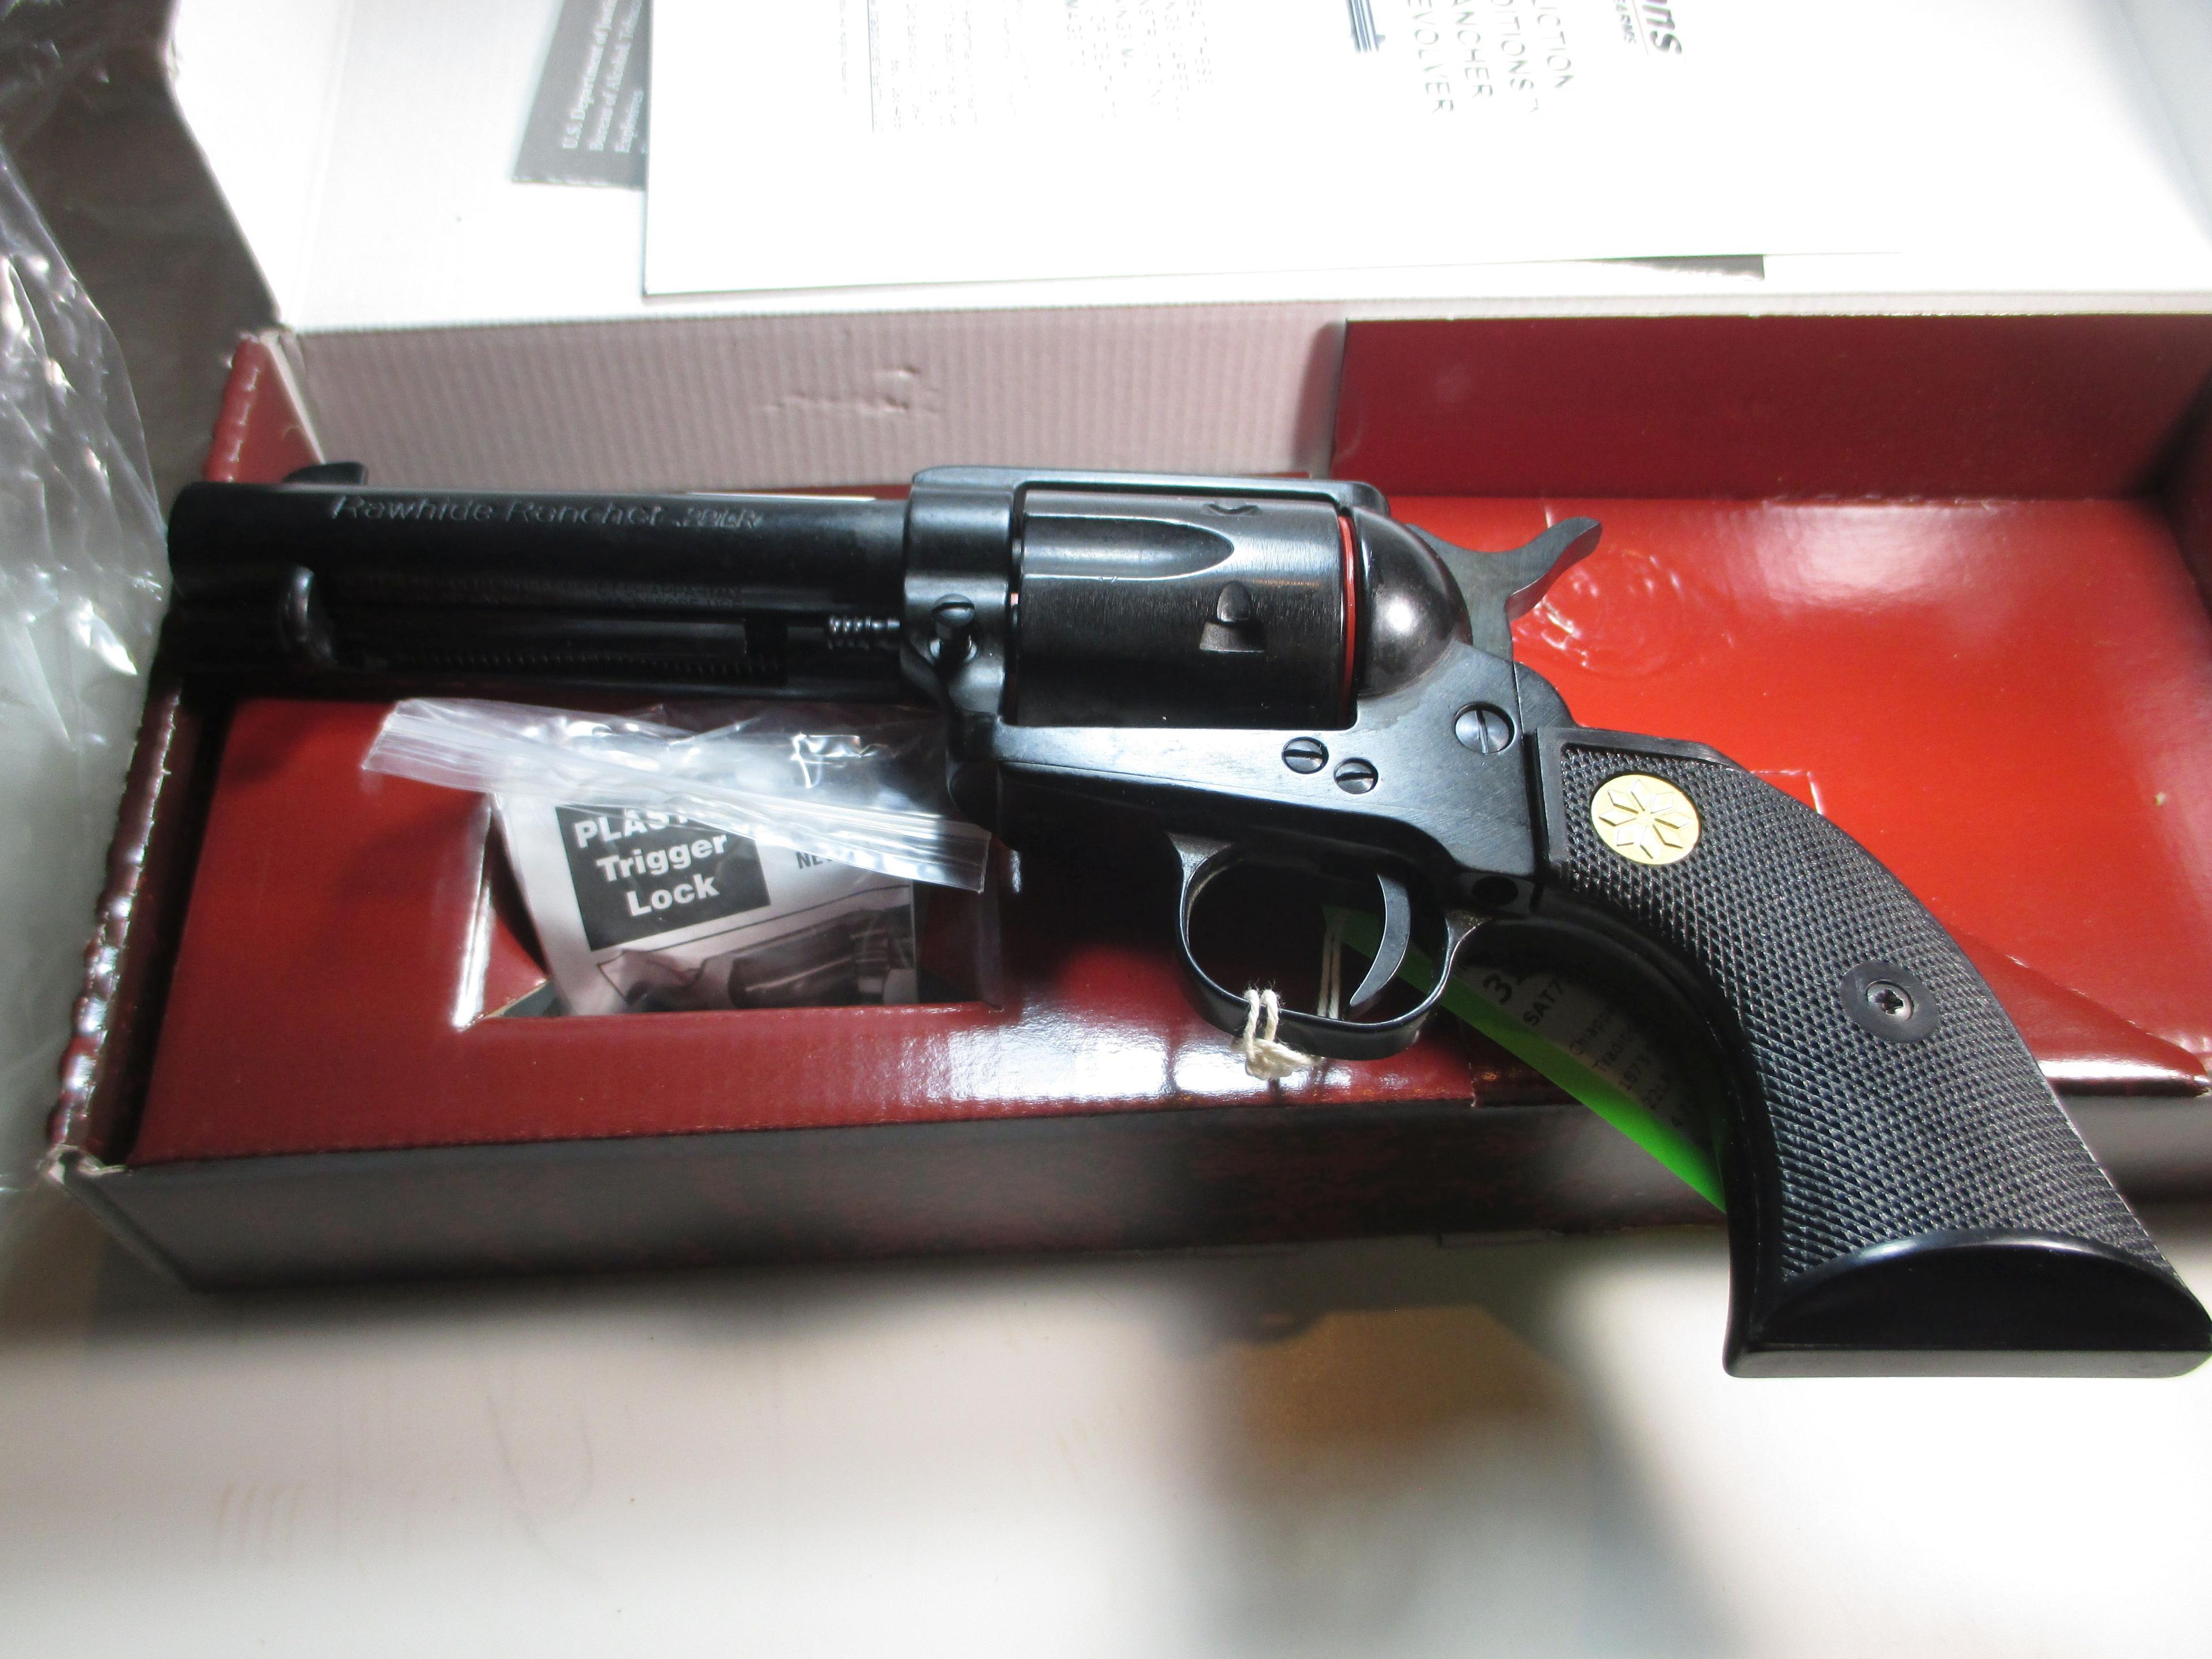 t-38 Traditions Rawhide Rancher 22LR Revolver